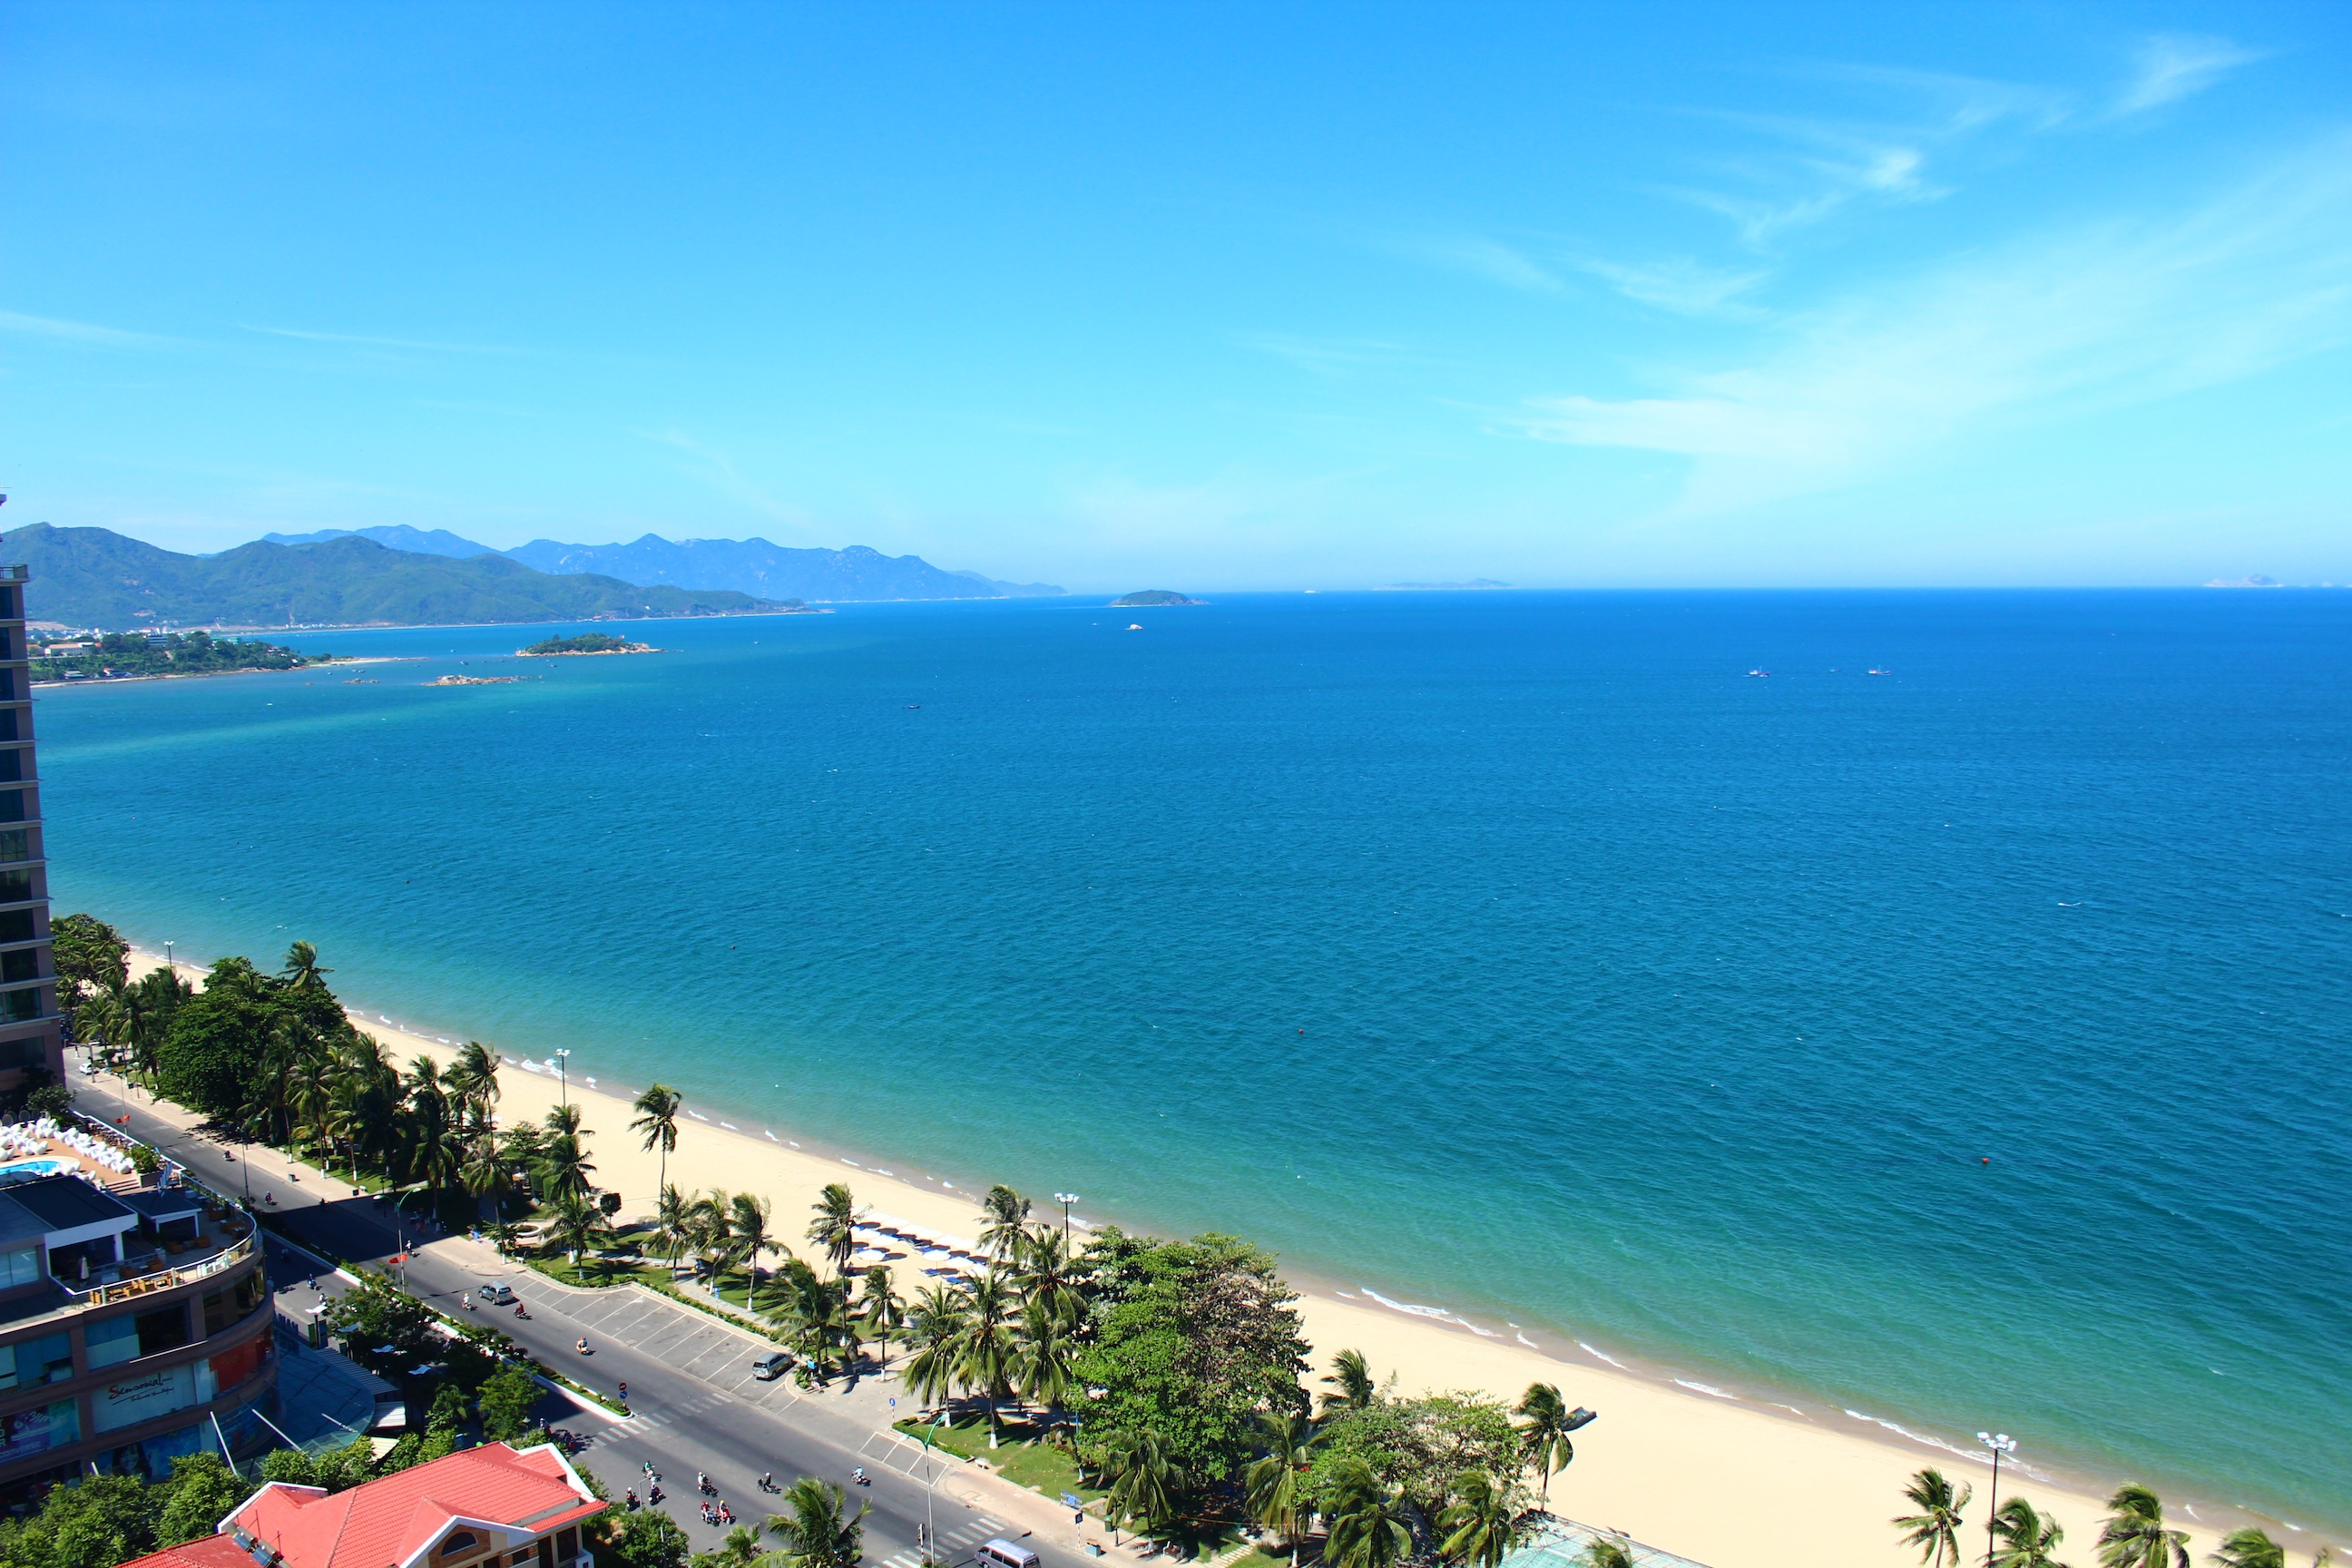 View of the beach in Nha Trang